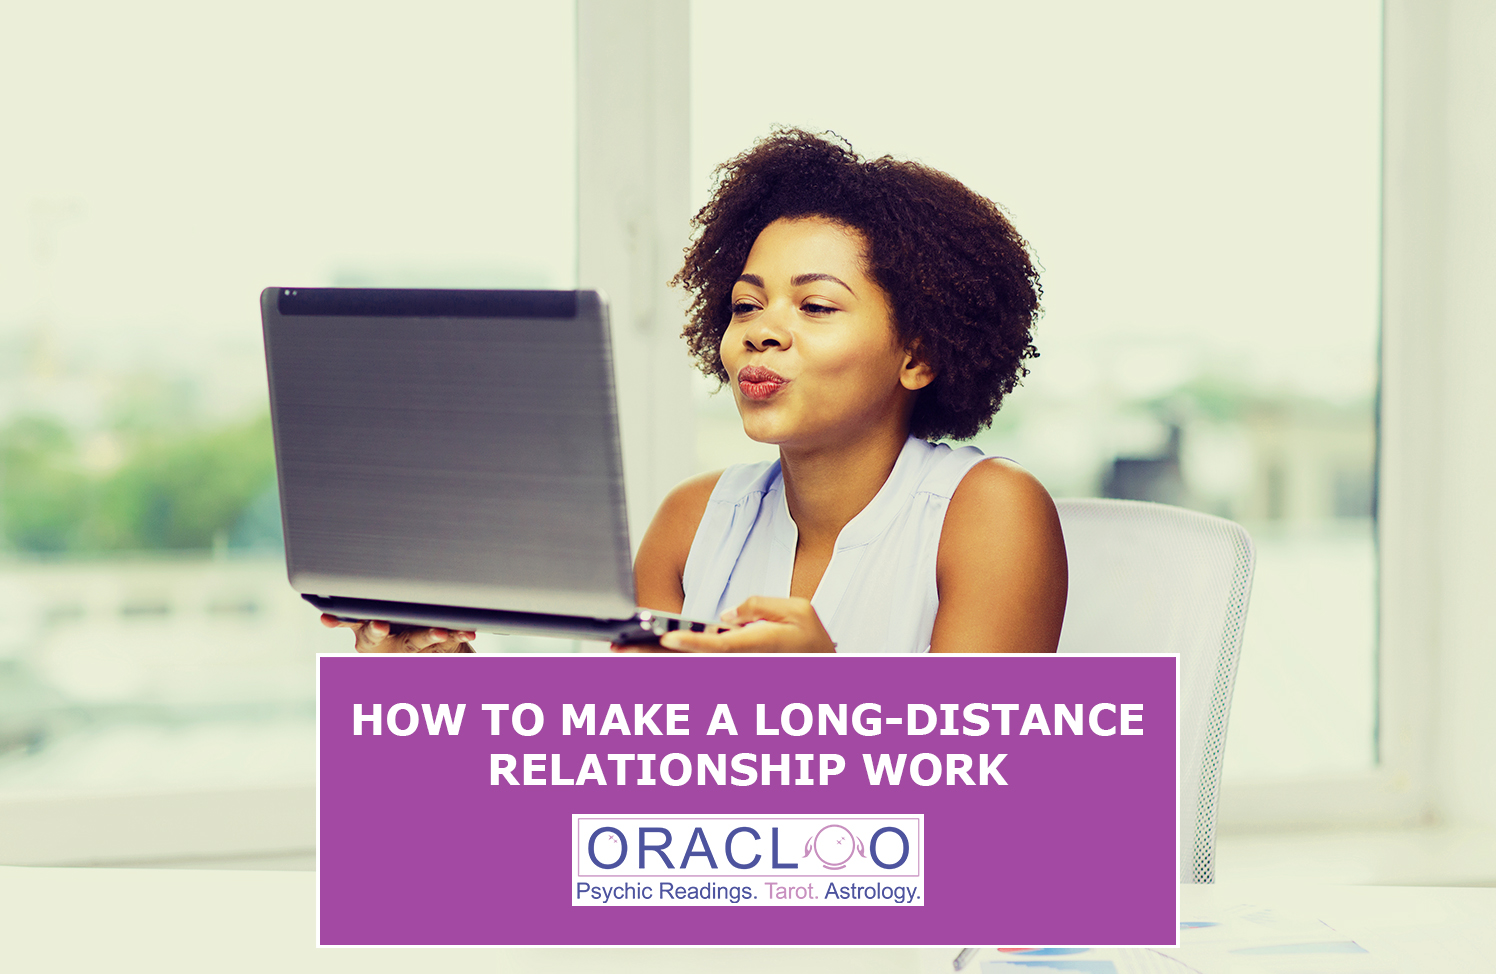 Oracloo - How to Make a Long-Distance Relationship Work